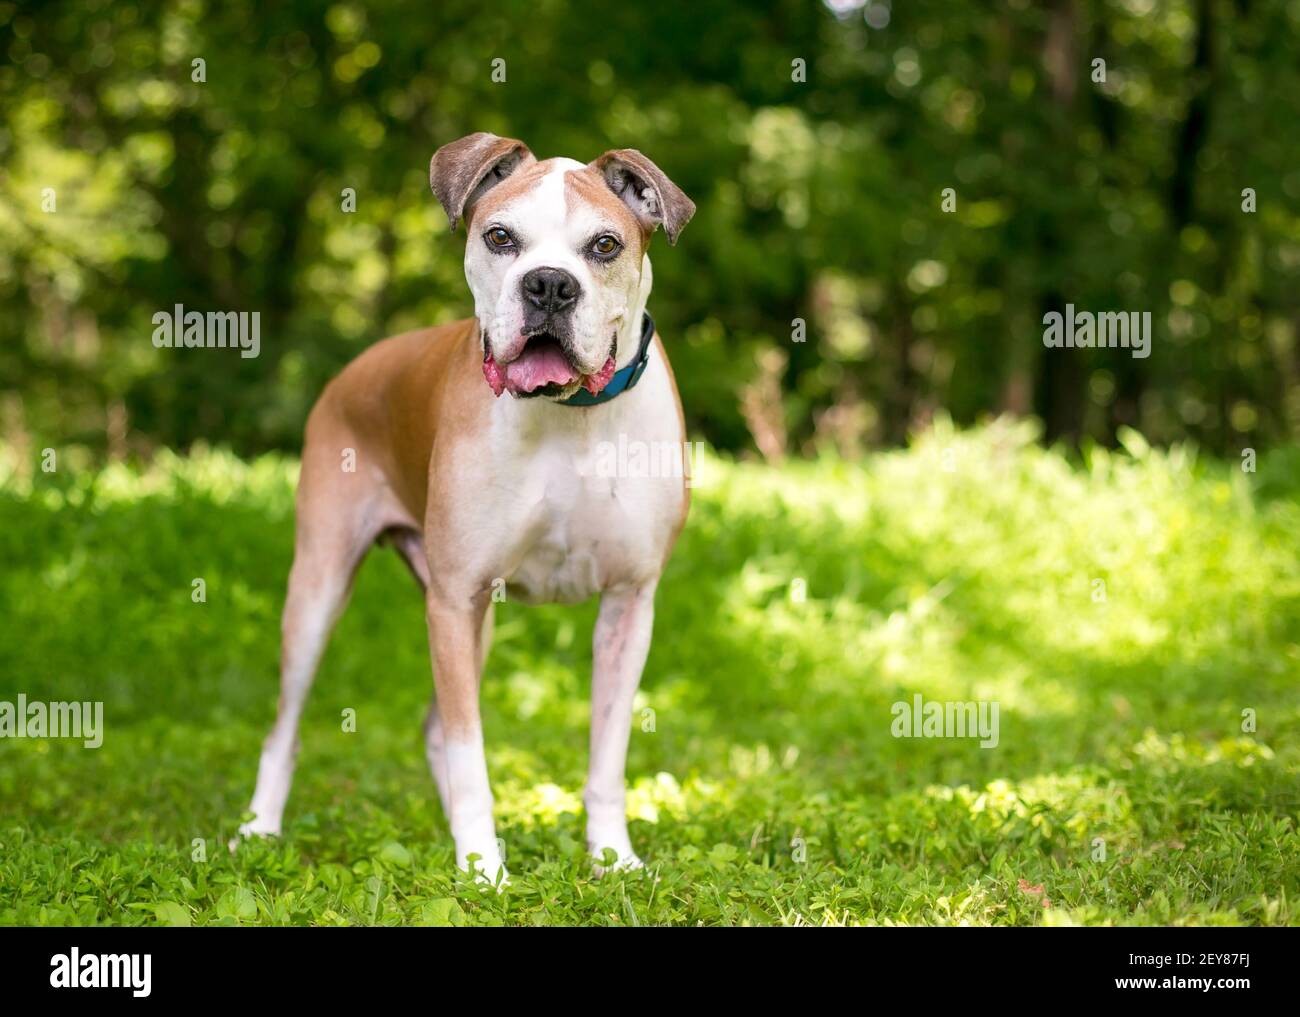 A senior Boxer dog looking at the camera with a happy expression Stock Photo